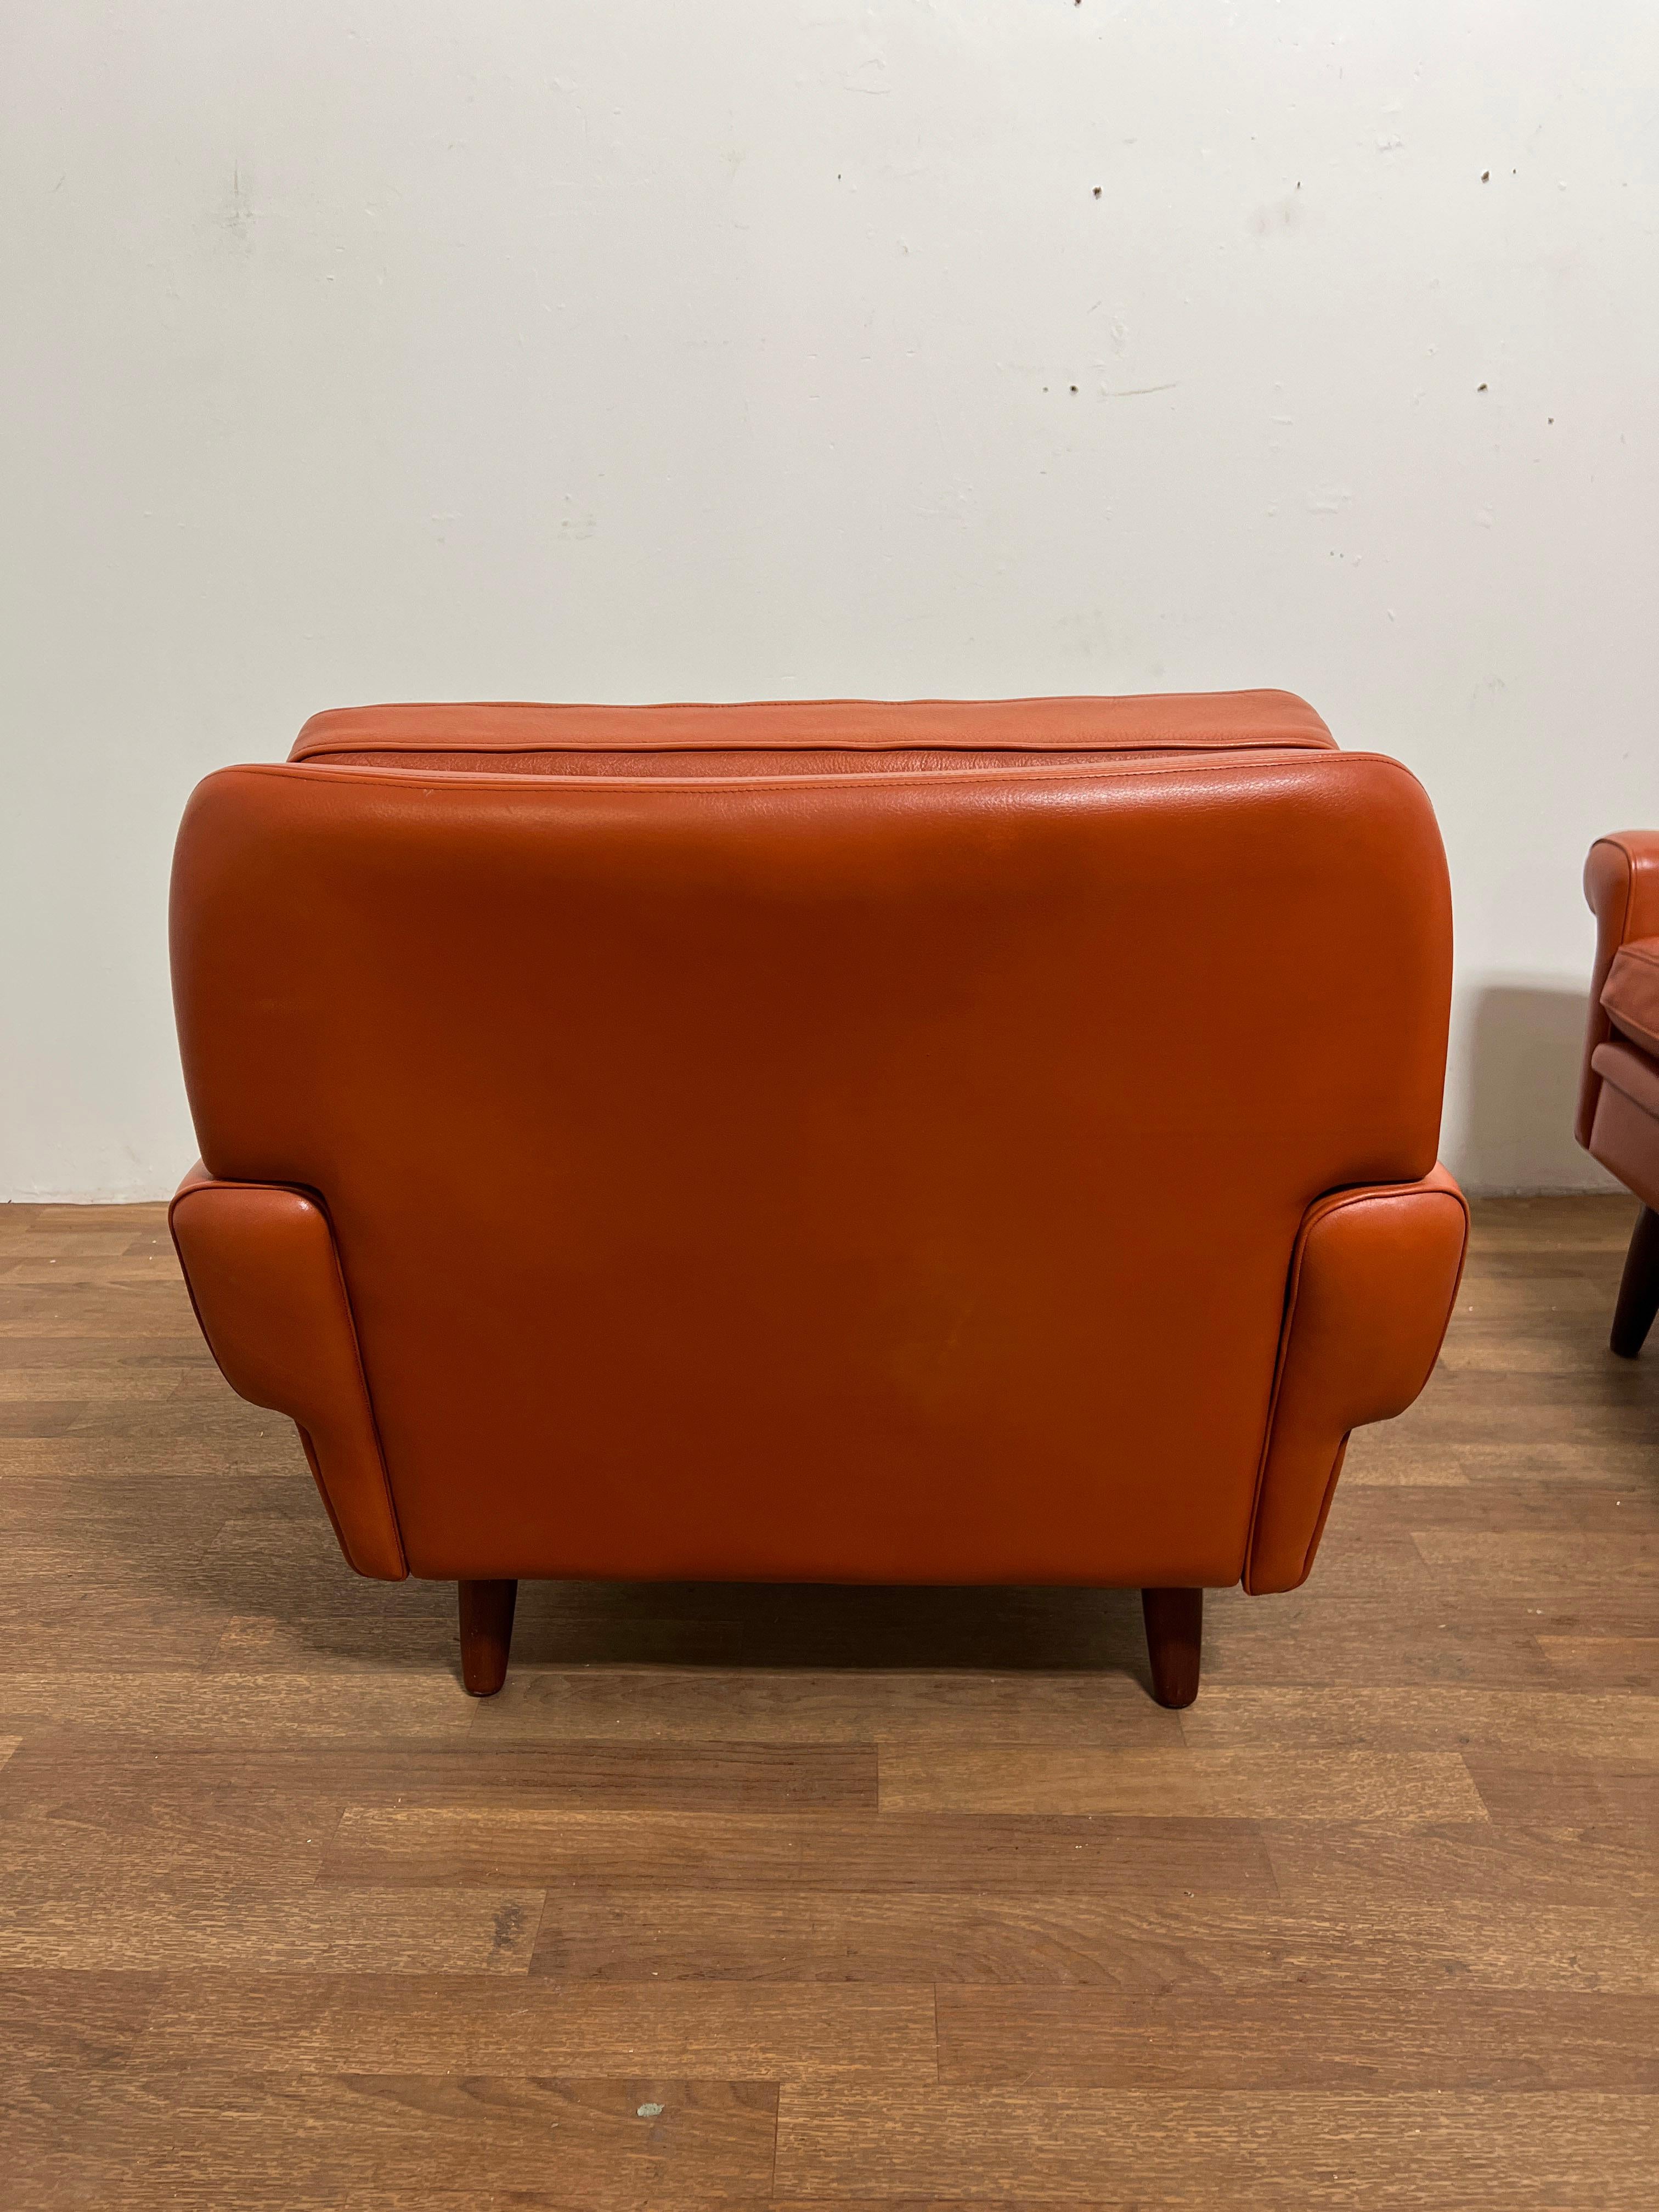 Mid-20th Century Pair of Danish Leather Lounge Chairs by Svend Skipper, Circa 1960s For Sale